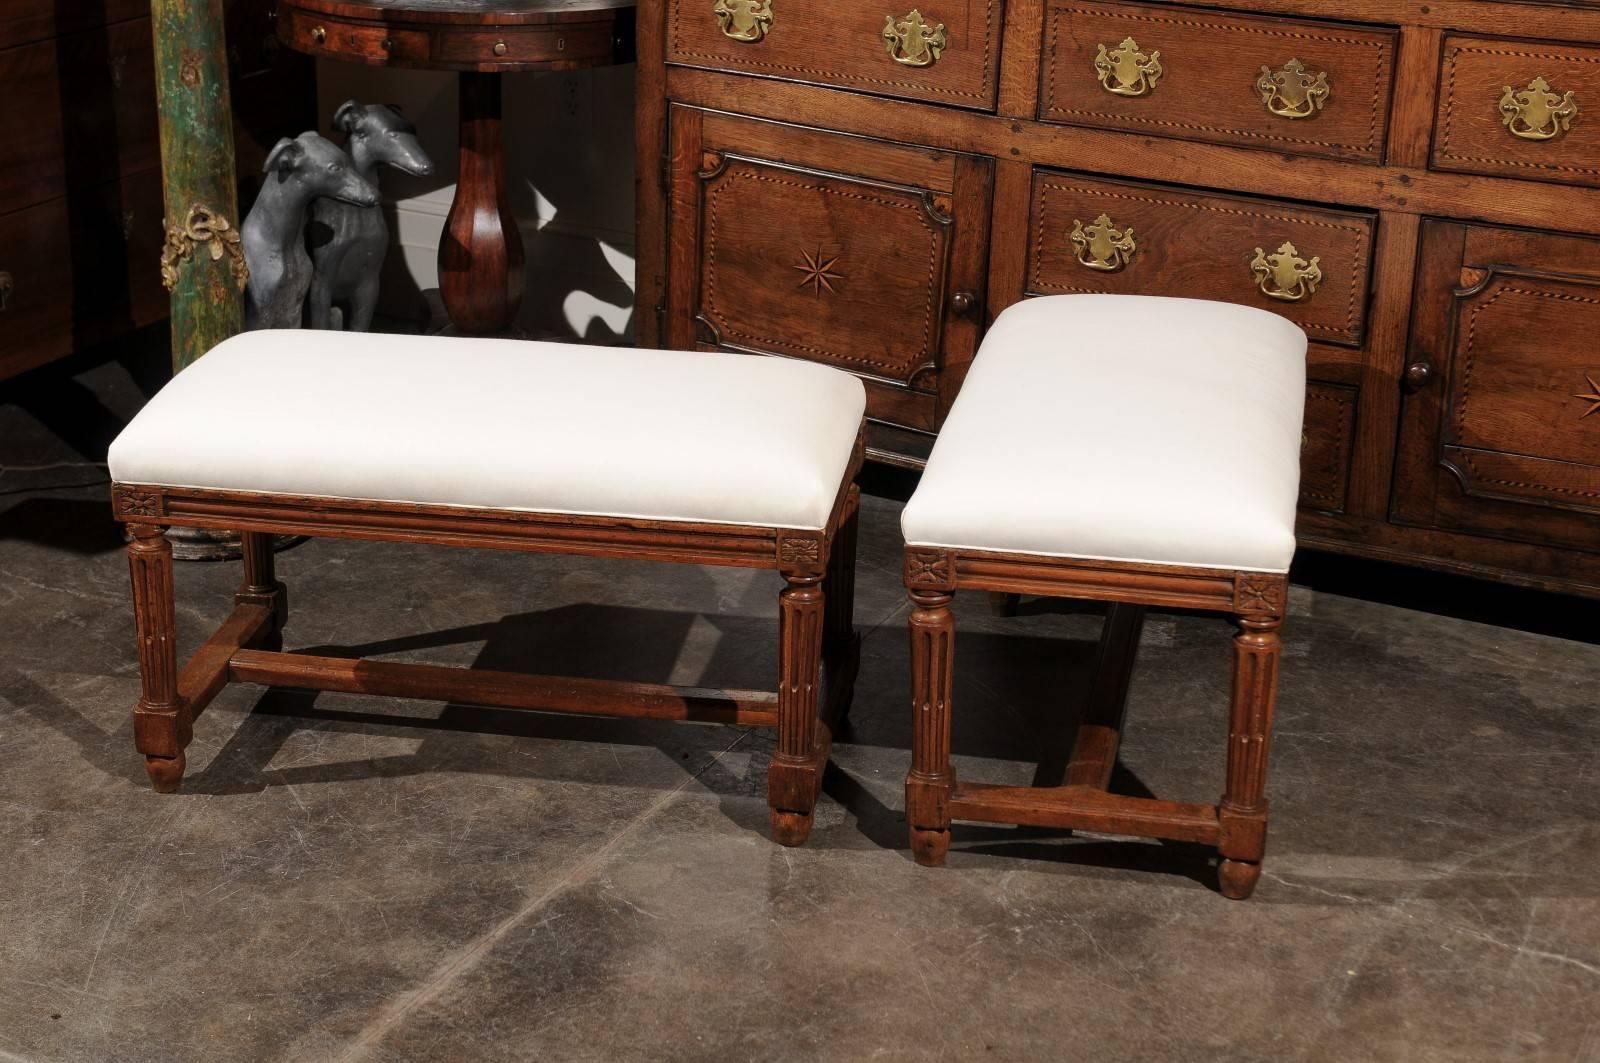 Pair of Italian Walnut Upholstered Wooden Benches from the Early 19th Century 4